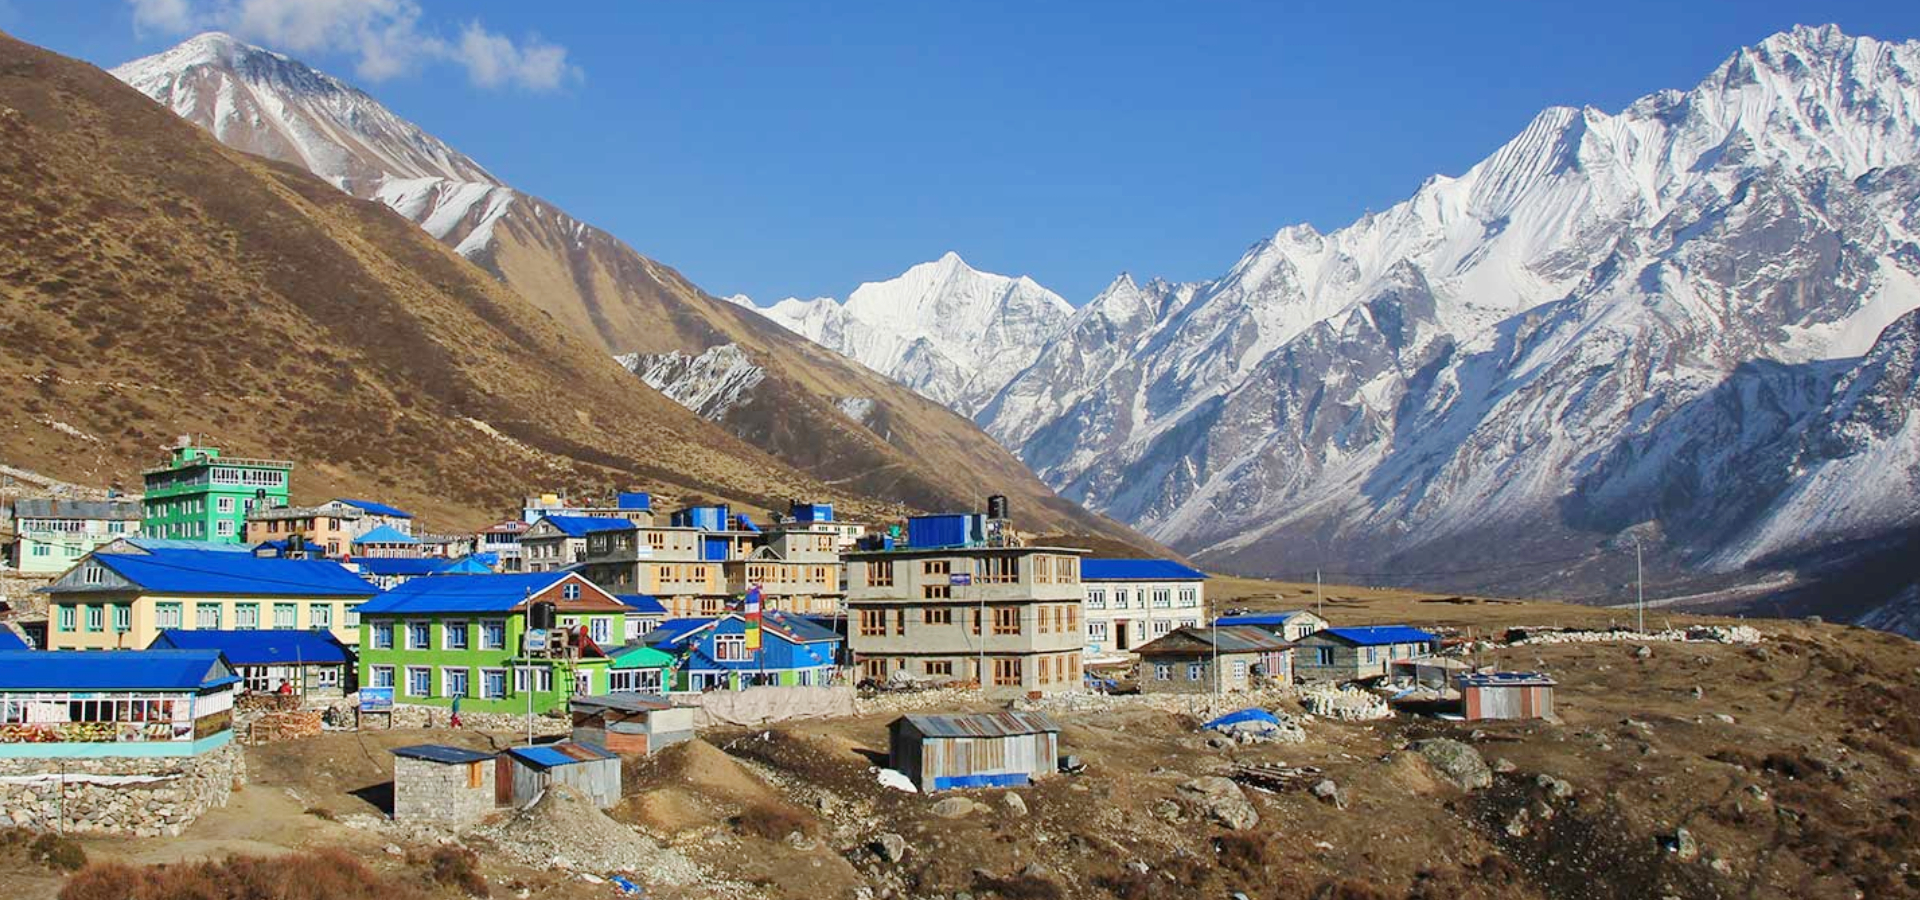 Langtang Valley with mountains scenario's in right side and homes in right side - Langtang Valley Trek with Hiking Himalayas Treks & Expedition